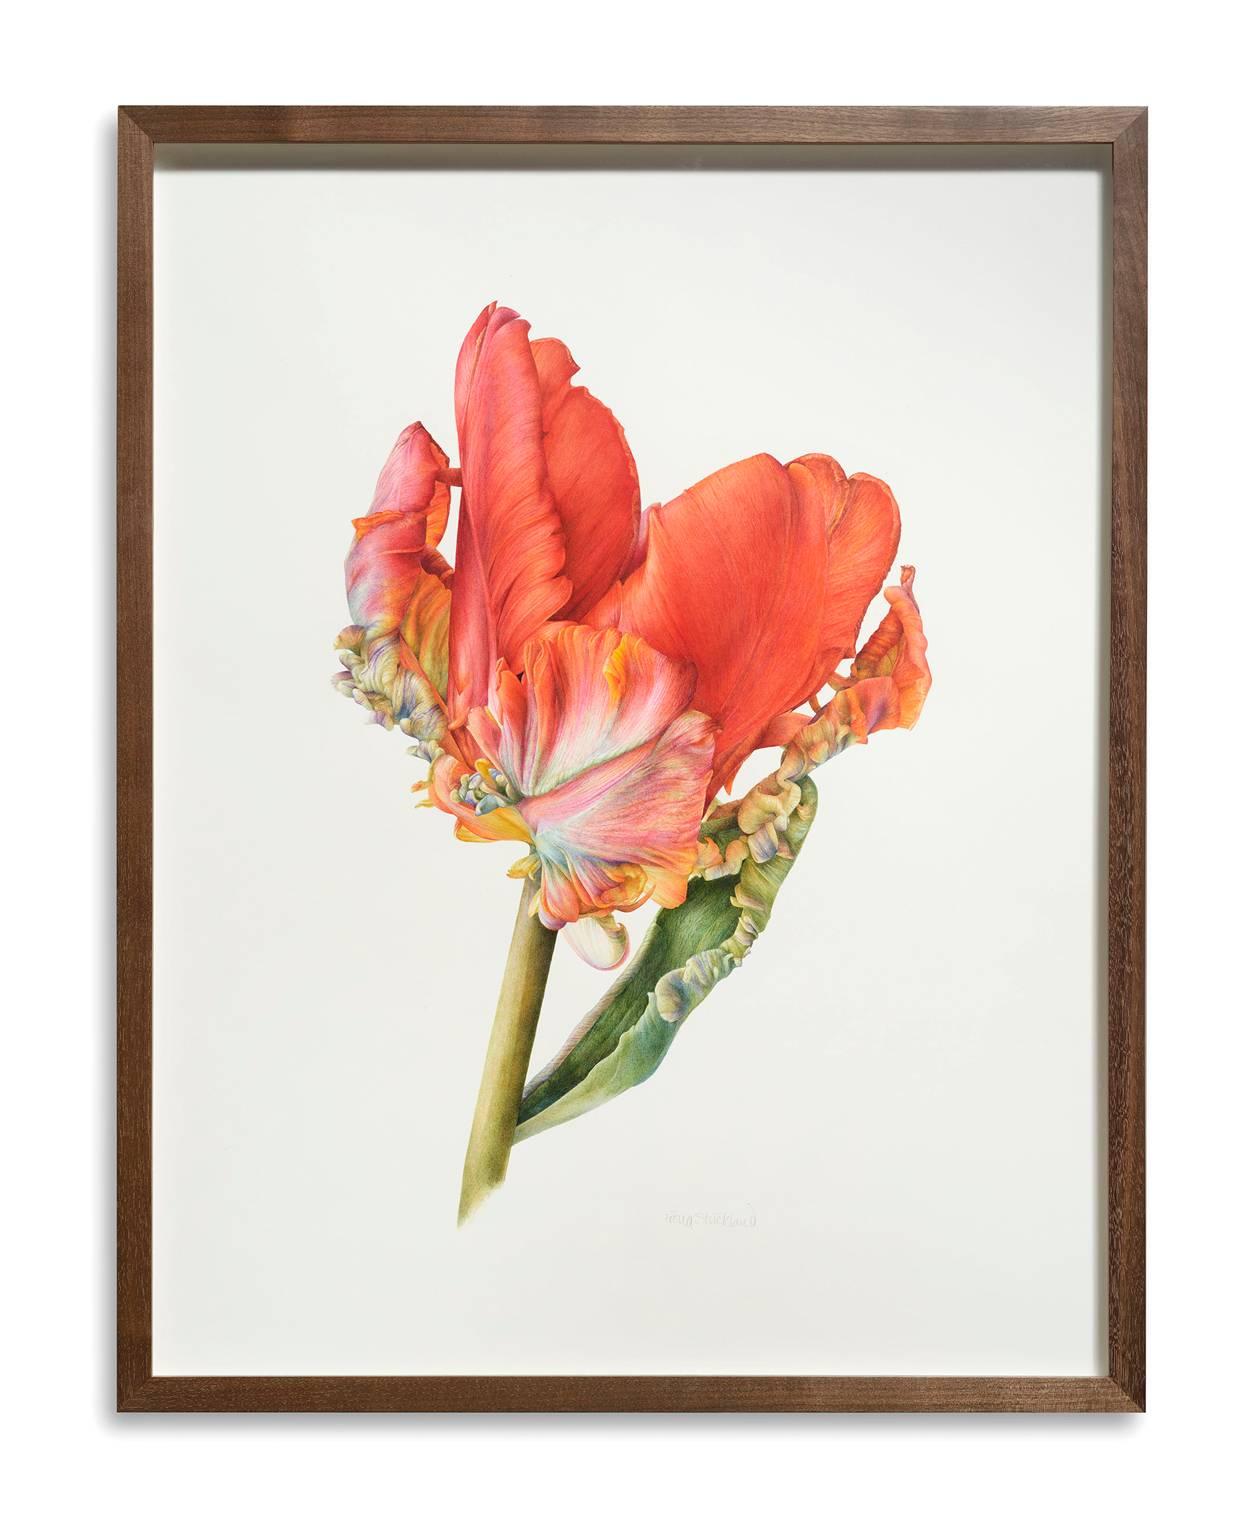 Parrot Tulip, Rococo (Tulipa 'Rococo') - Painting by Fiona Strickland